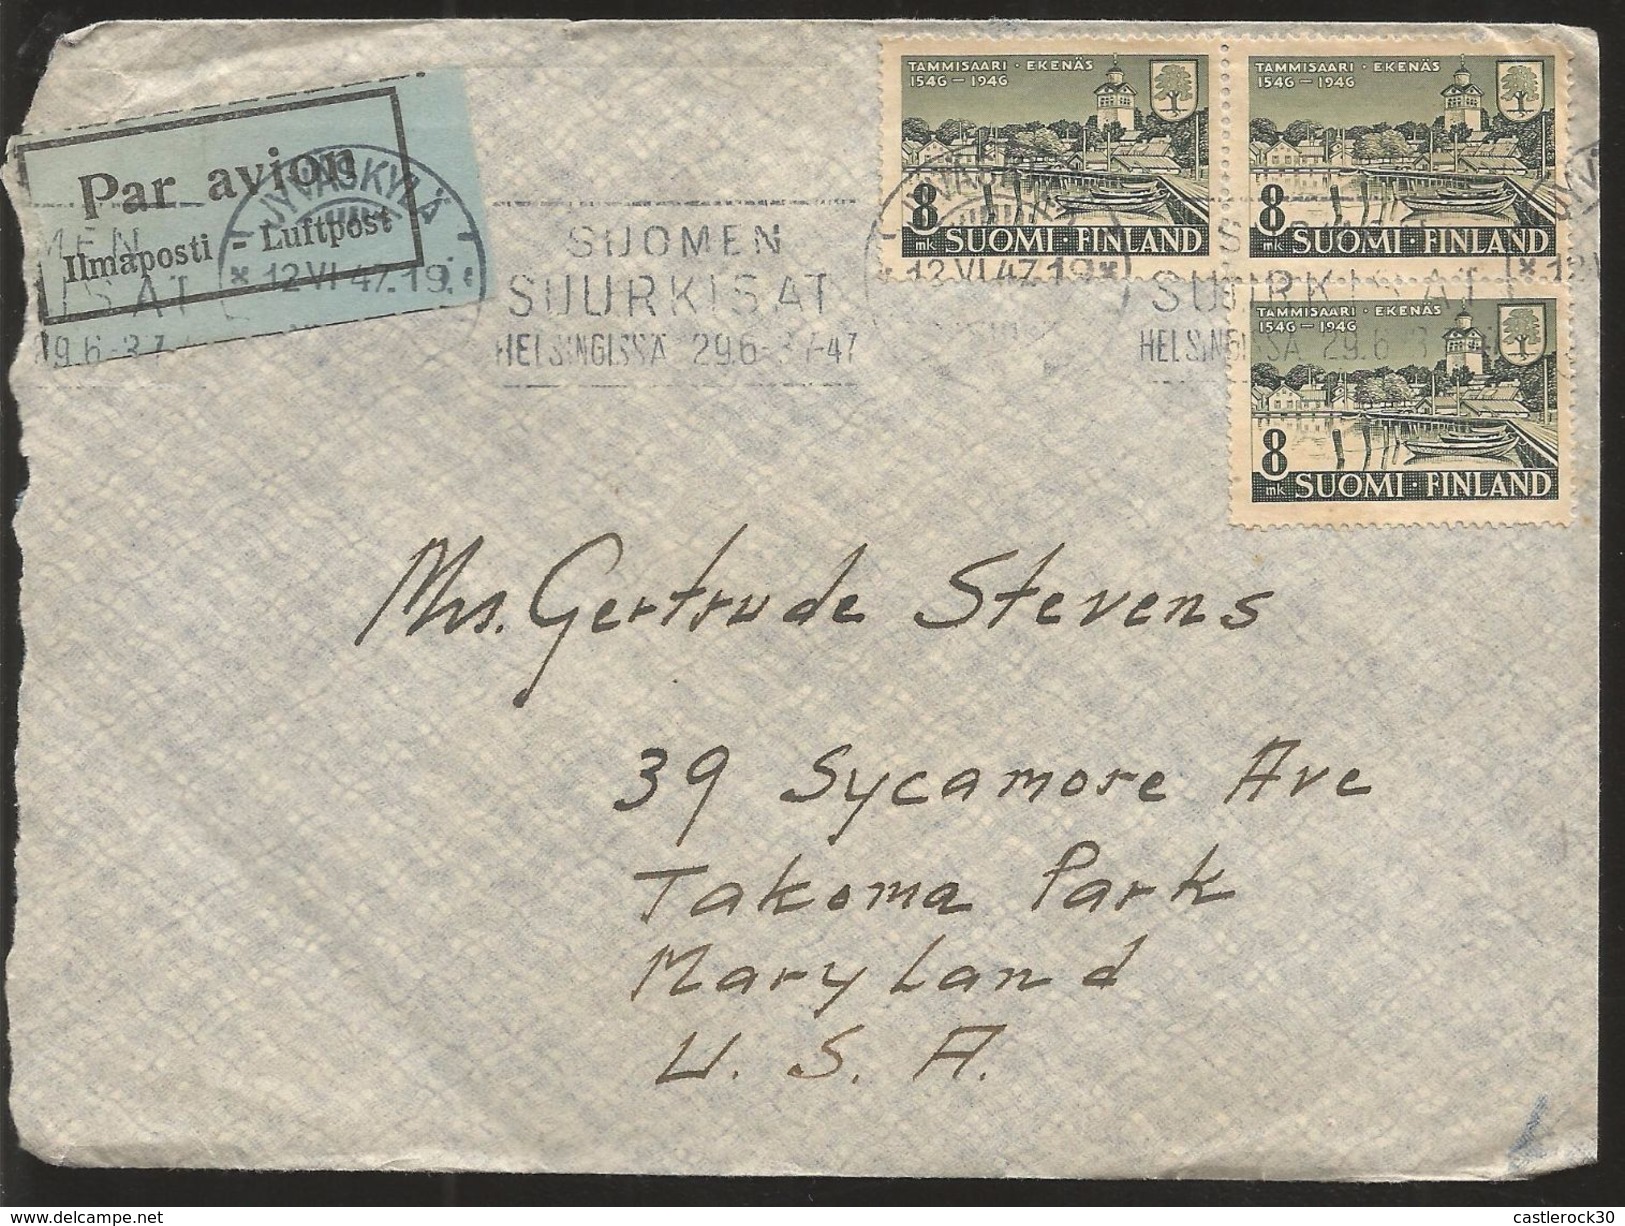 A) 1947 FINLAND, TOWN OF TAMISAARI, SEA, ARCHITECTURE, BOAT, CIRCULATED COVER FROM FINLAND TO USA. - Oblitérés